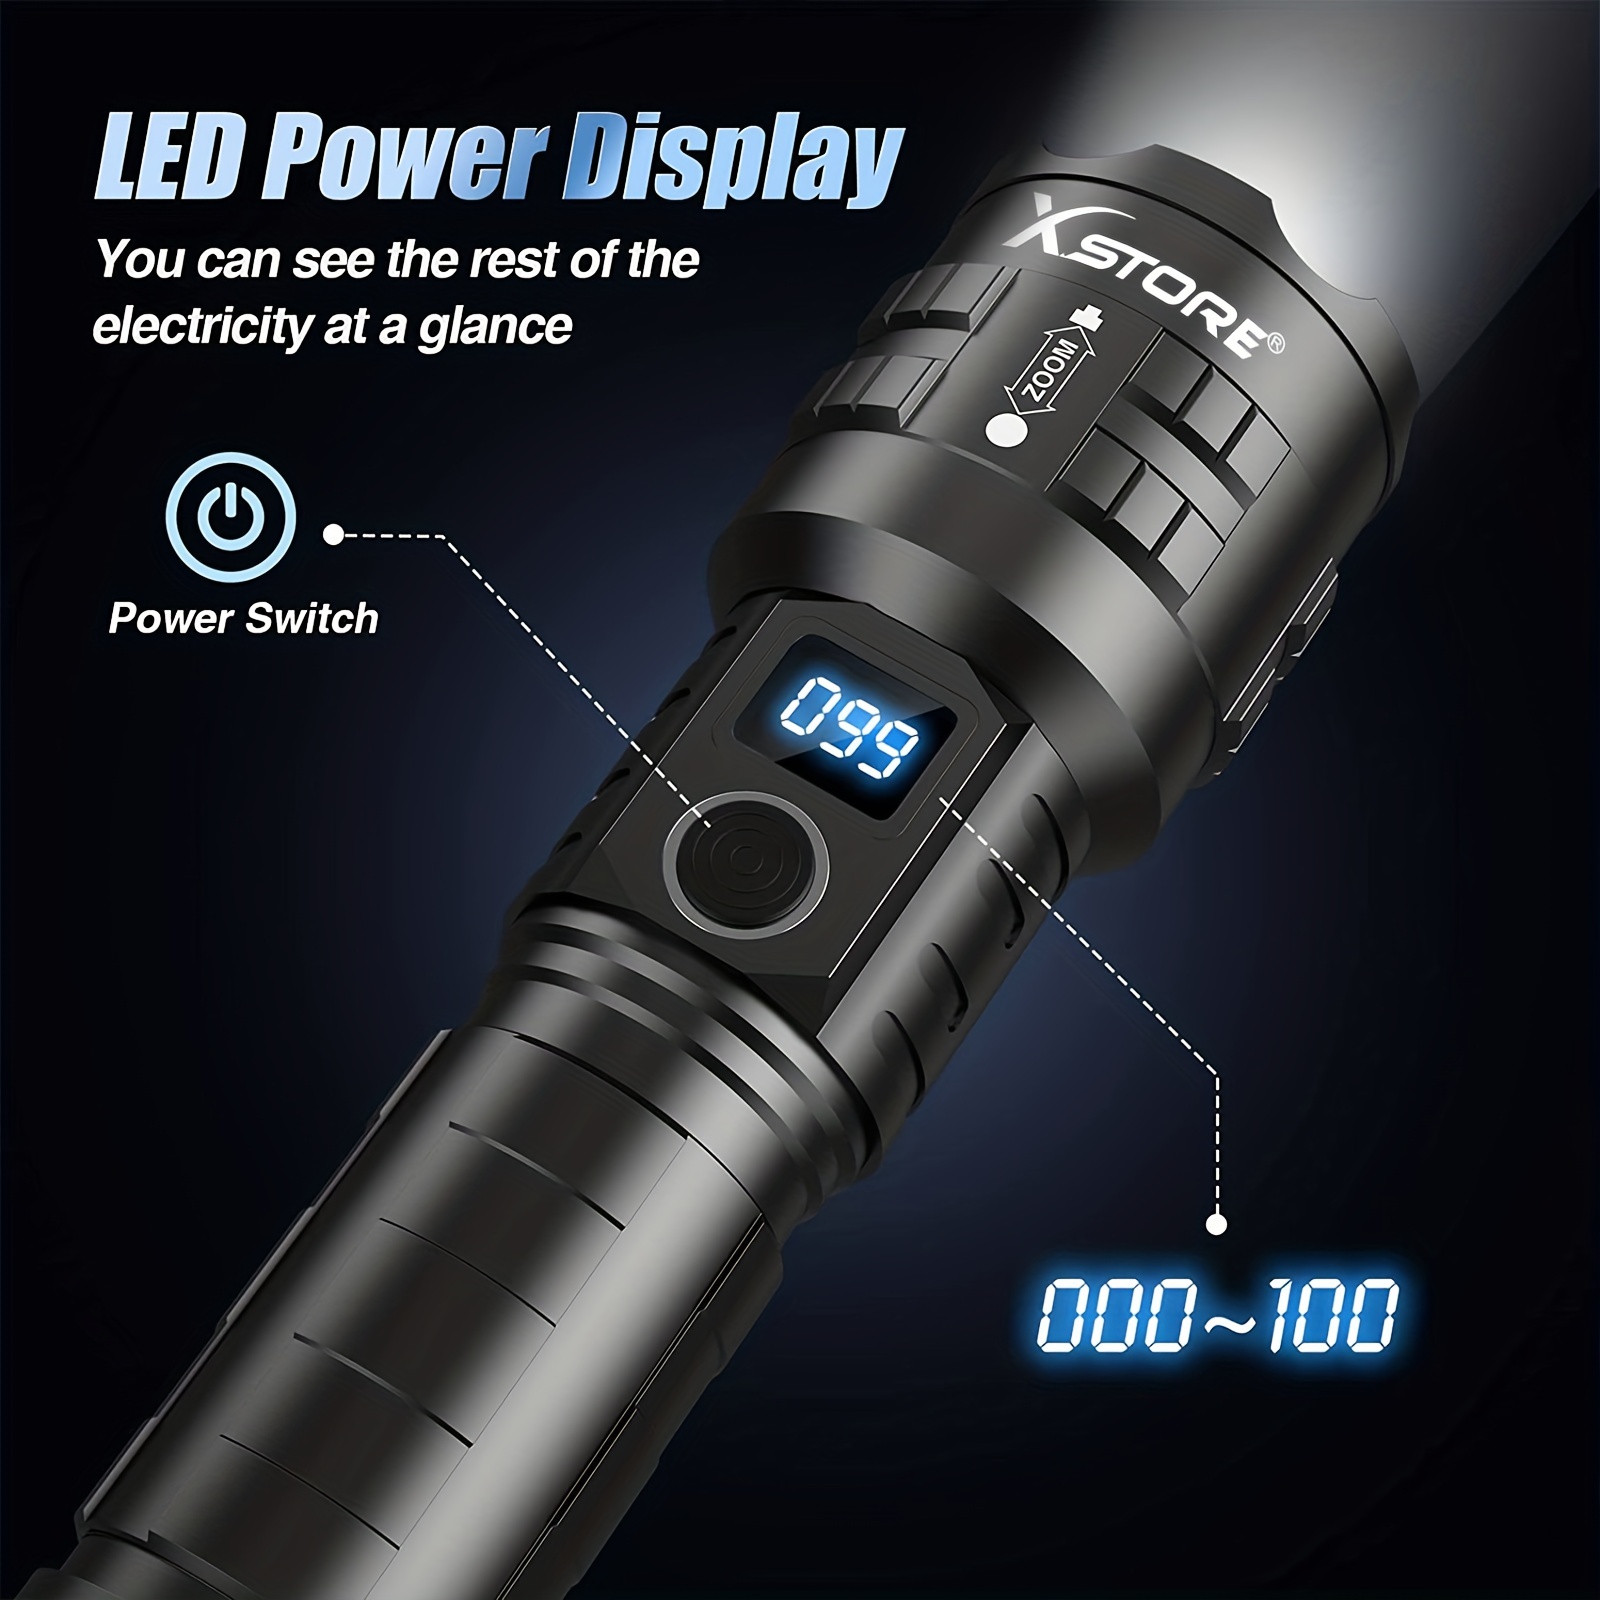 100000 Lumens Powerful Flashlight, Rechargeable Waterproof Searchlight  XHP70 Super Bright Handheld Led Flashlight Tactical Flashlight 26650  Battery